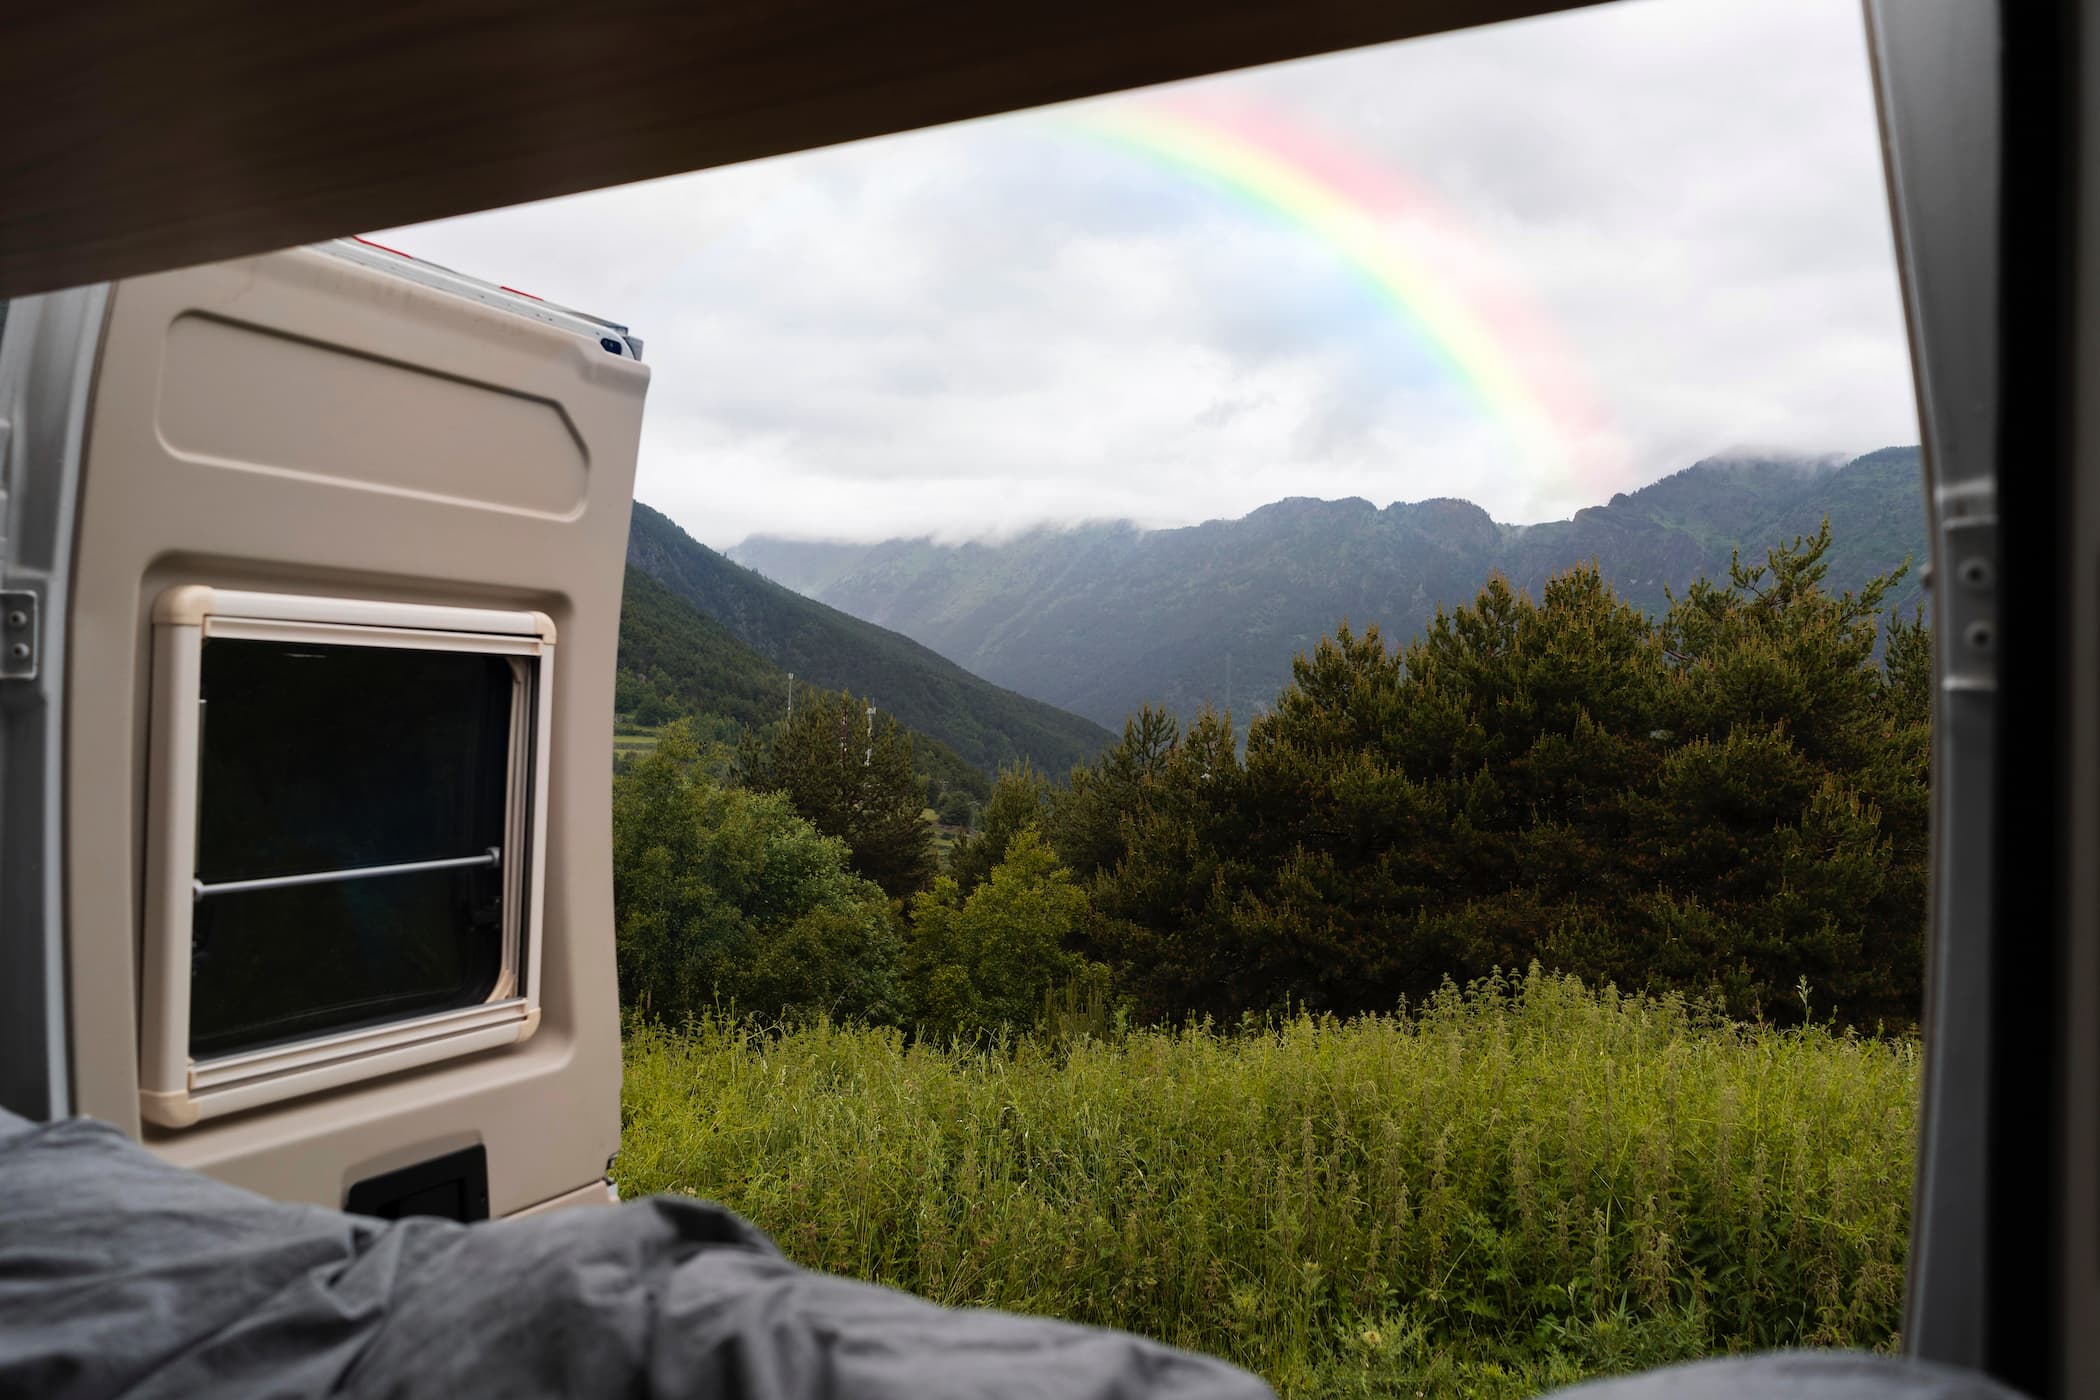 Enjoy an unforgettable vacation in a motorhome with Adventure Campers